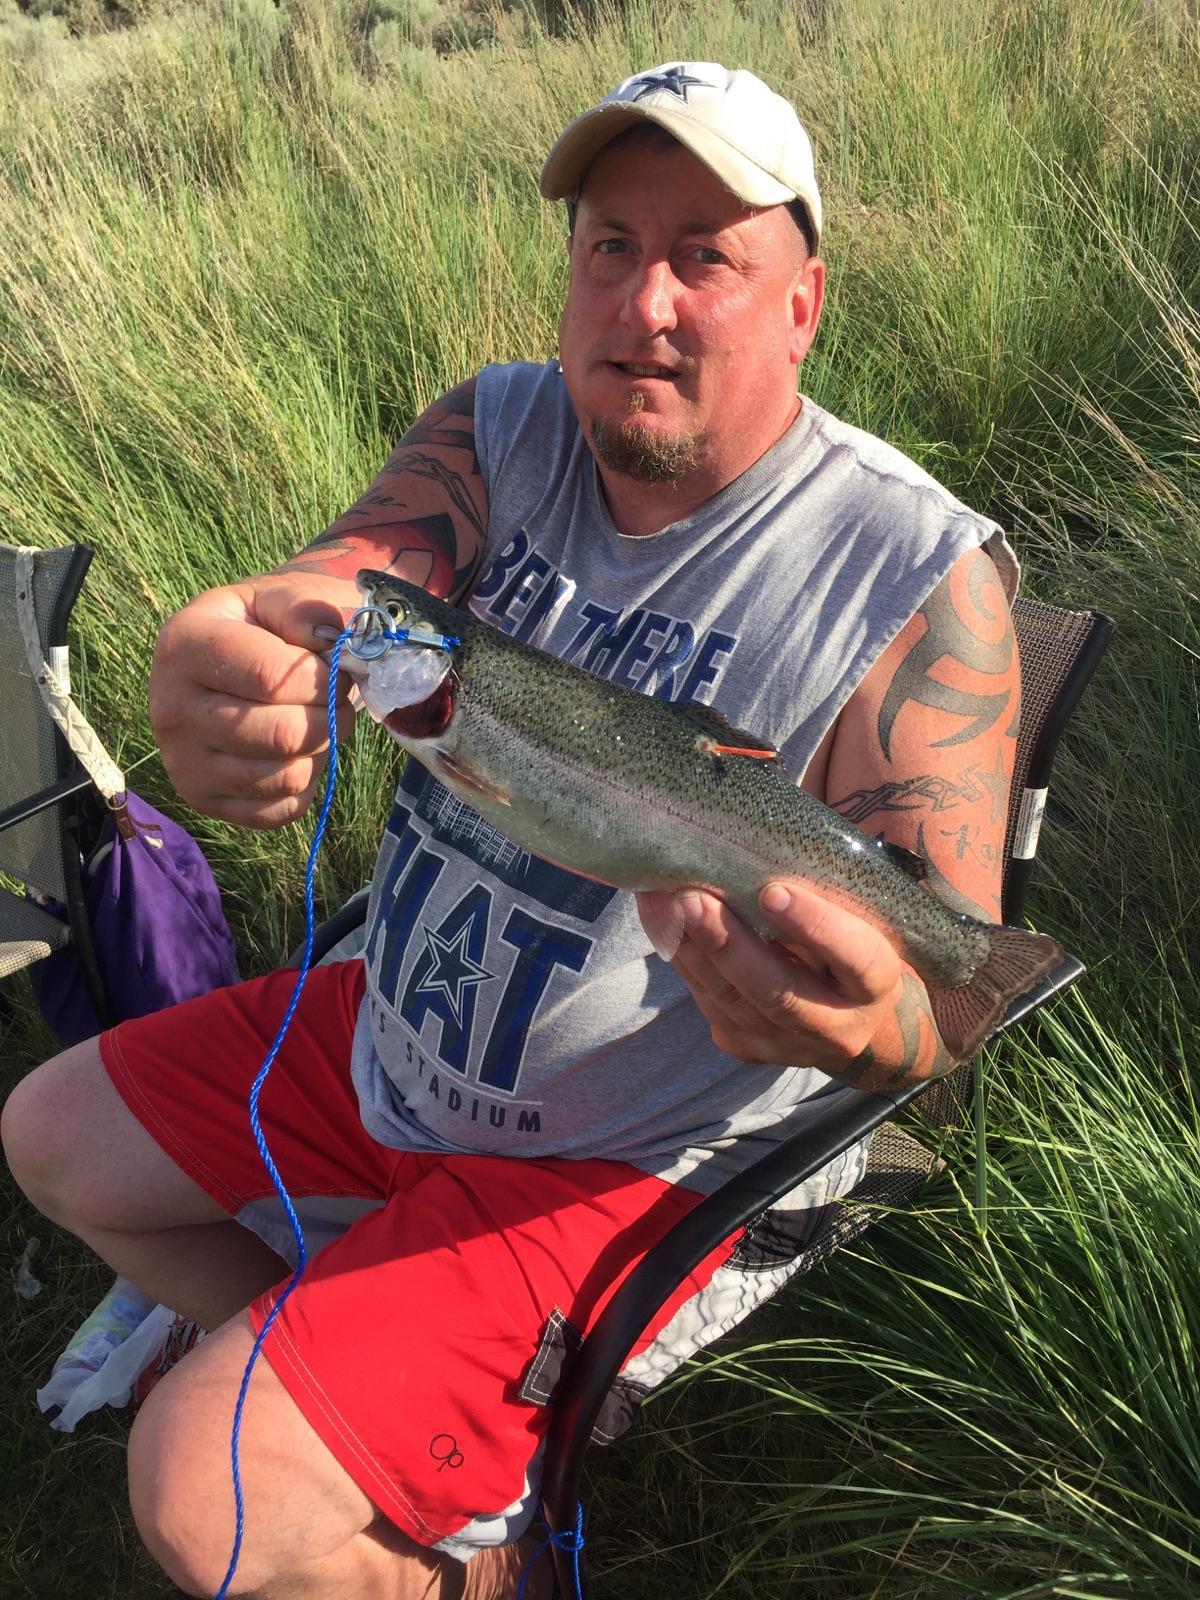 Shane Anderson of Belfair displays the tagged trout he caught June 10 on Corral Lake.